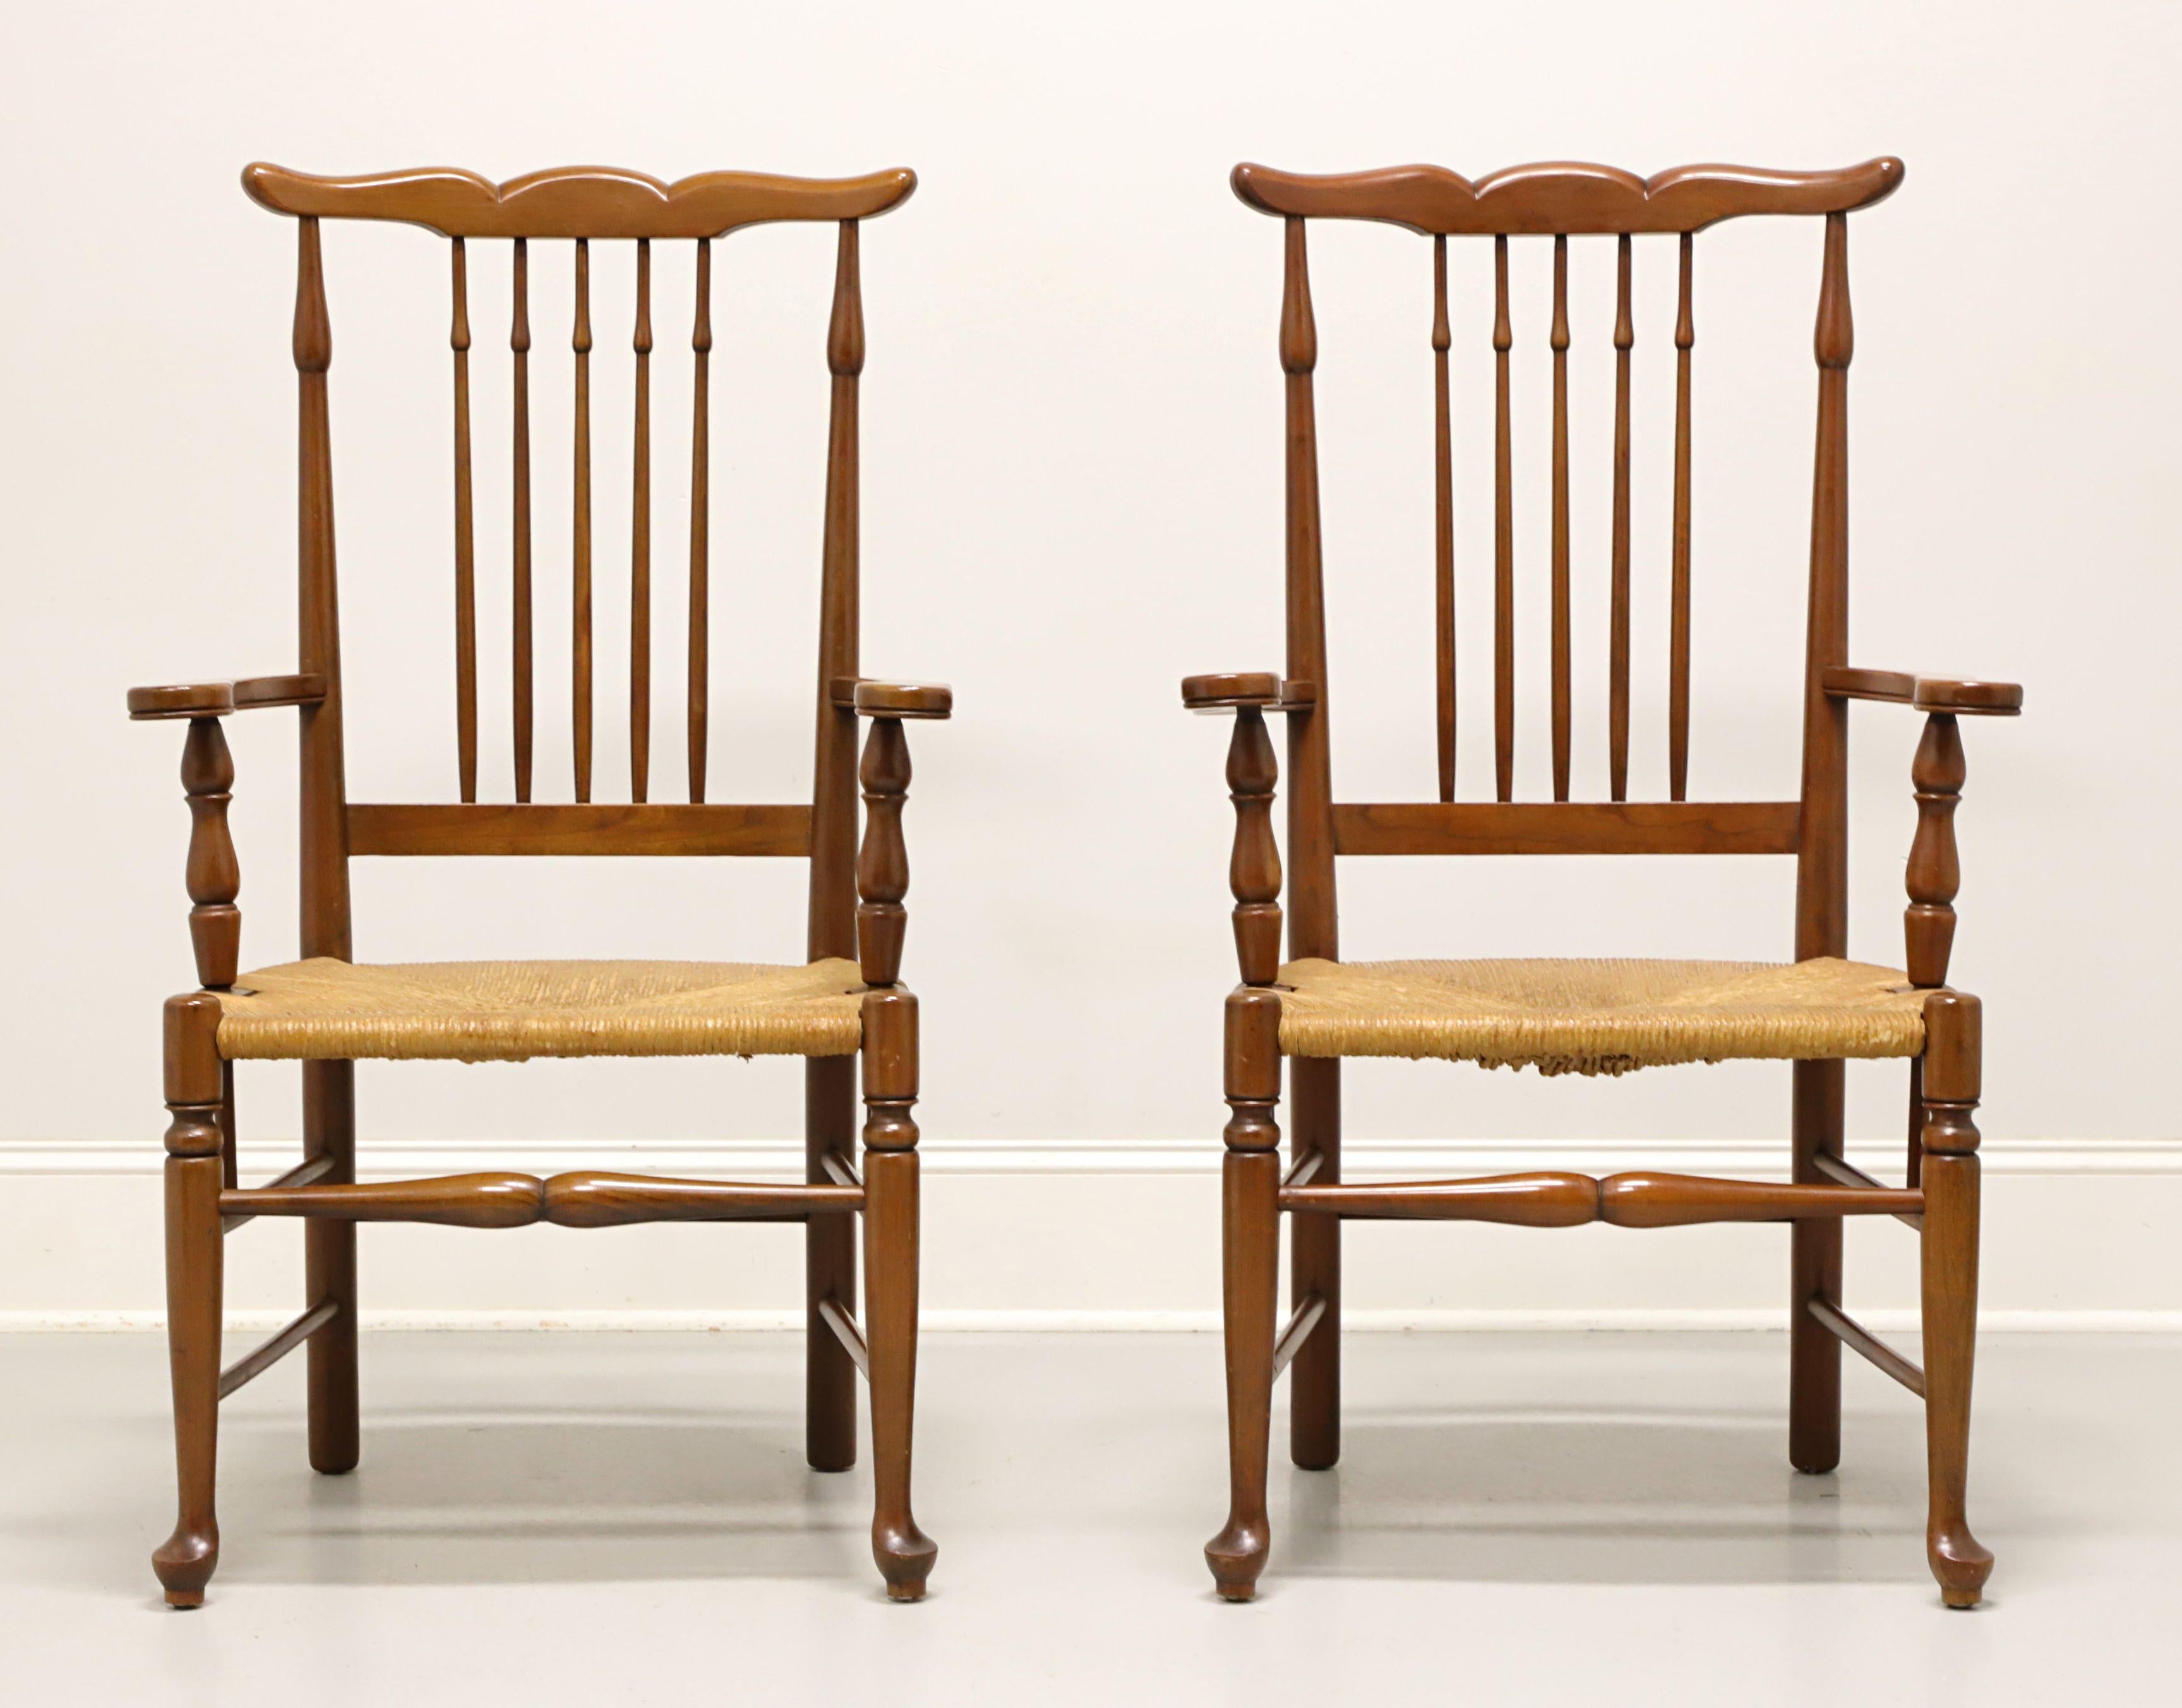 Rustic Mid 20th Century Cherry Farmhouse Dining Armchairs with Rush Seats - Pair For Sale